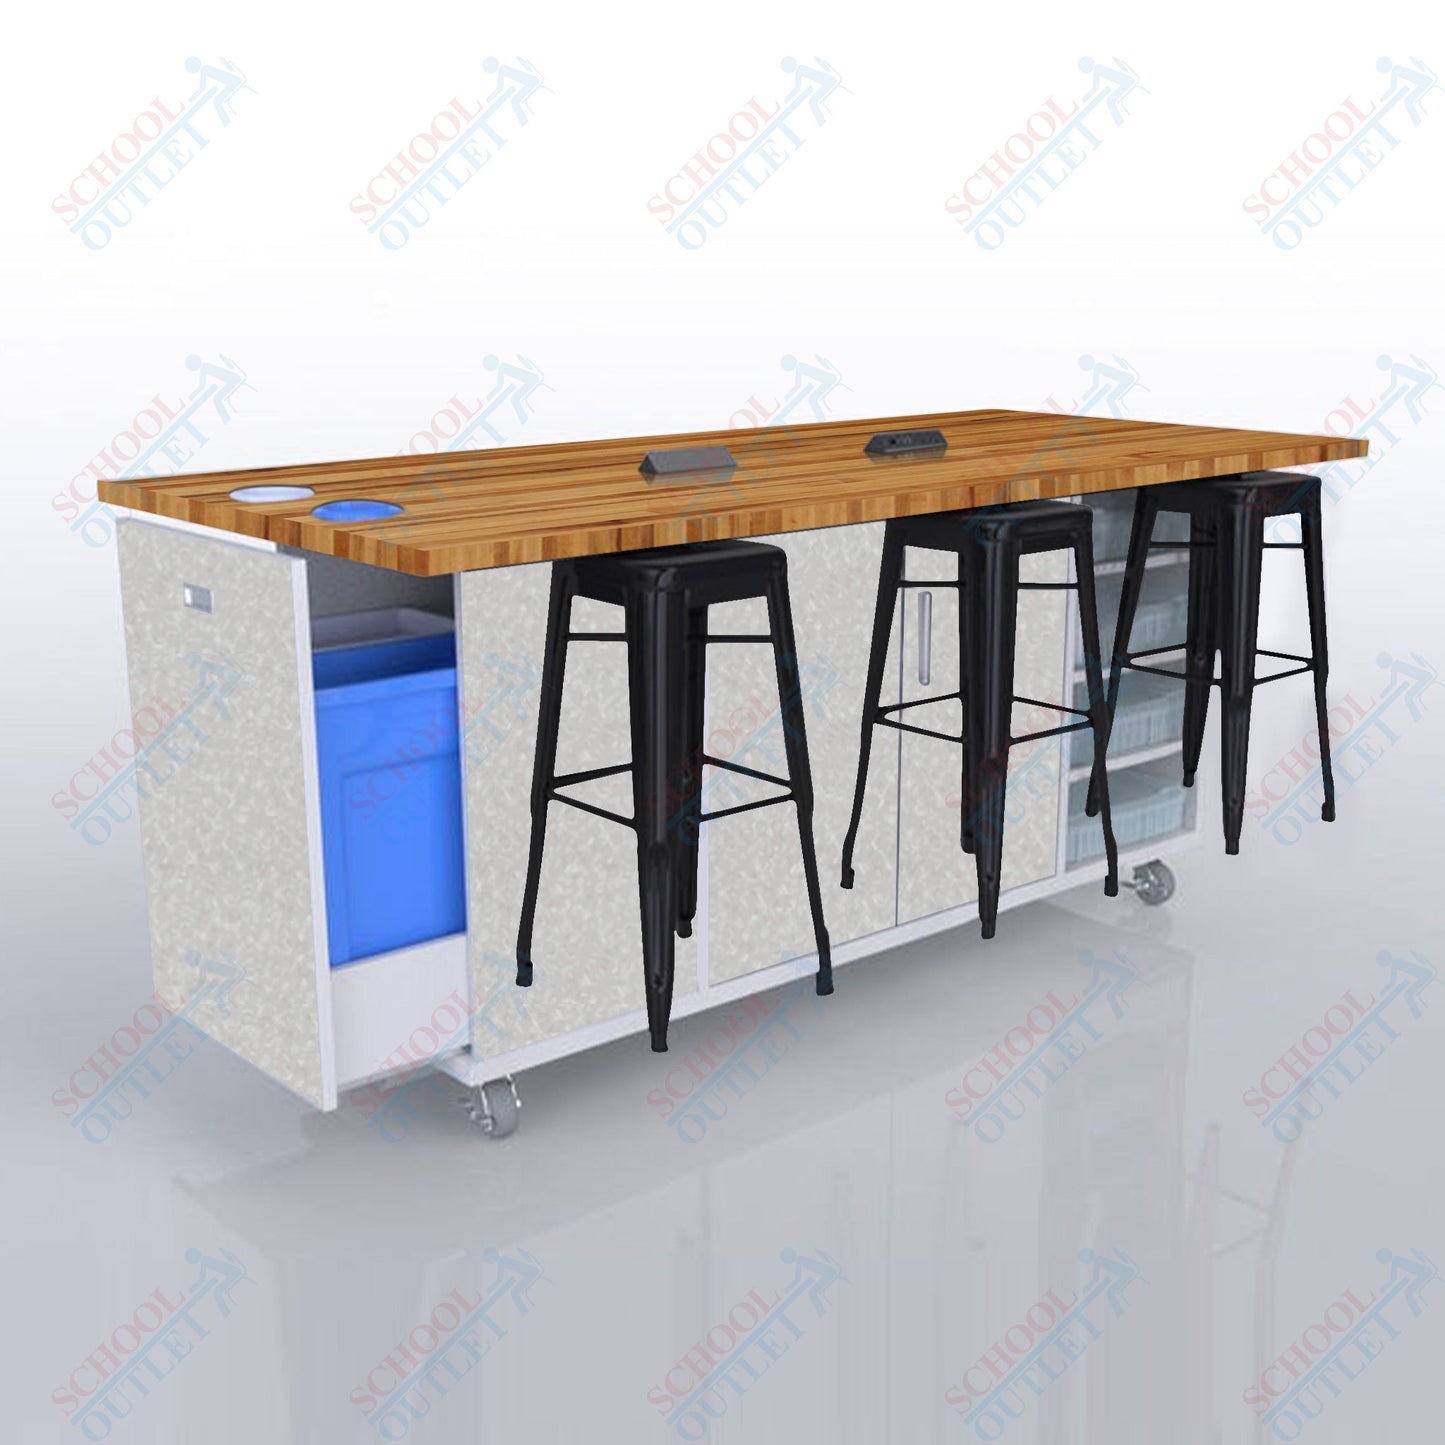 CEF ED Original Table 42"H Butcher Block Top, Laminate Base with  6 Stools, Storage Bins, Trash Bins, and Electrical Outlets Included.